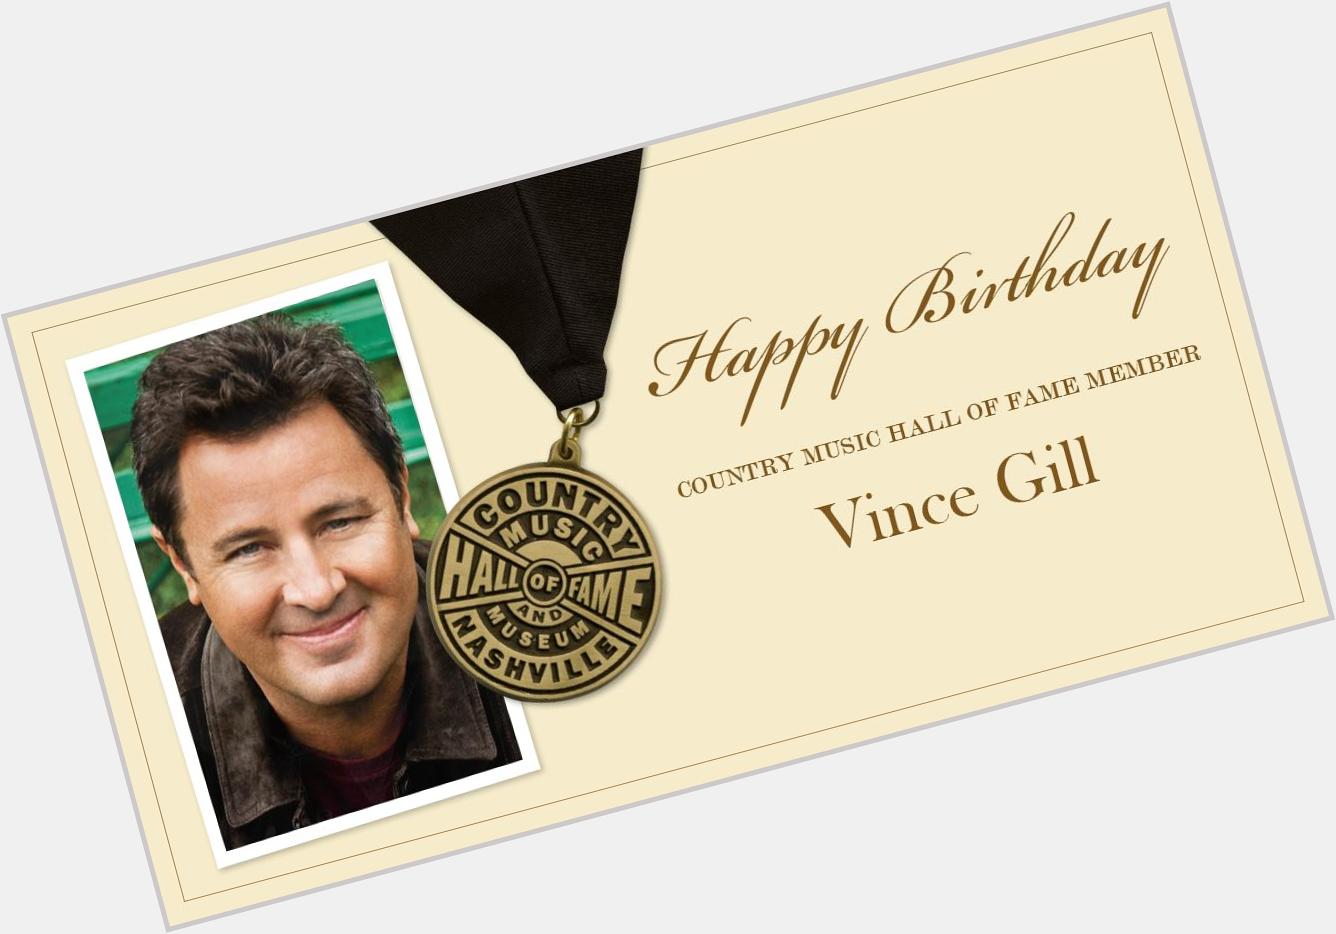 Join us in wishing Country Music Hall of Fame member Vince Gill ( a very happy birthday! 